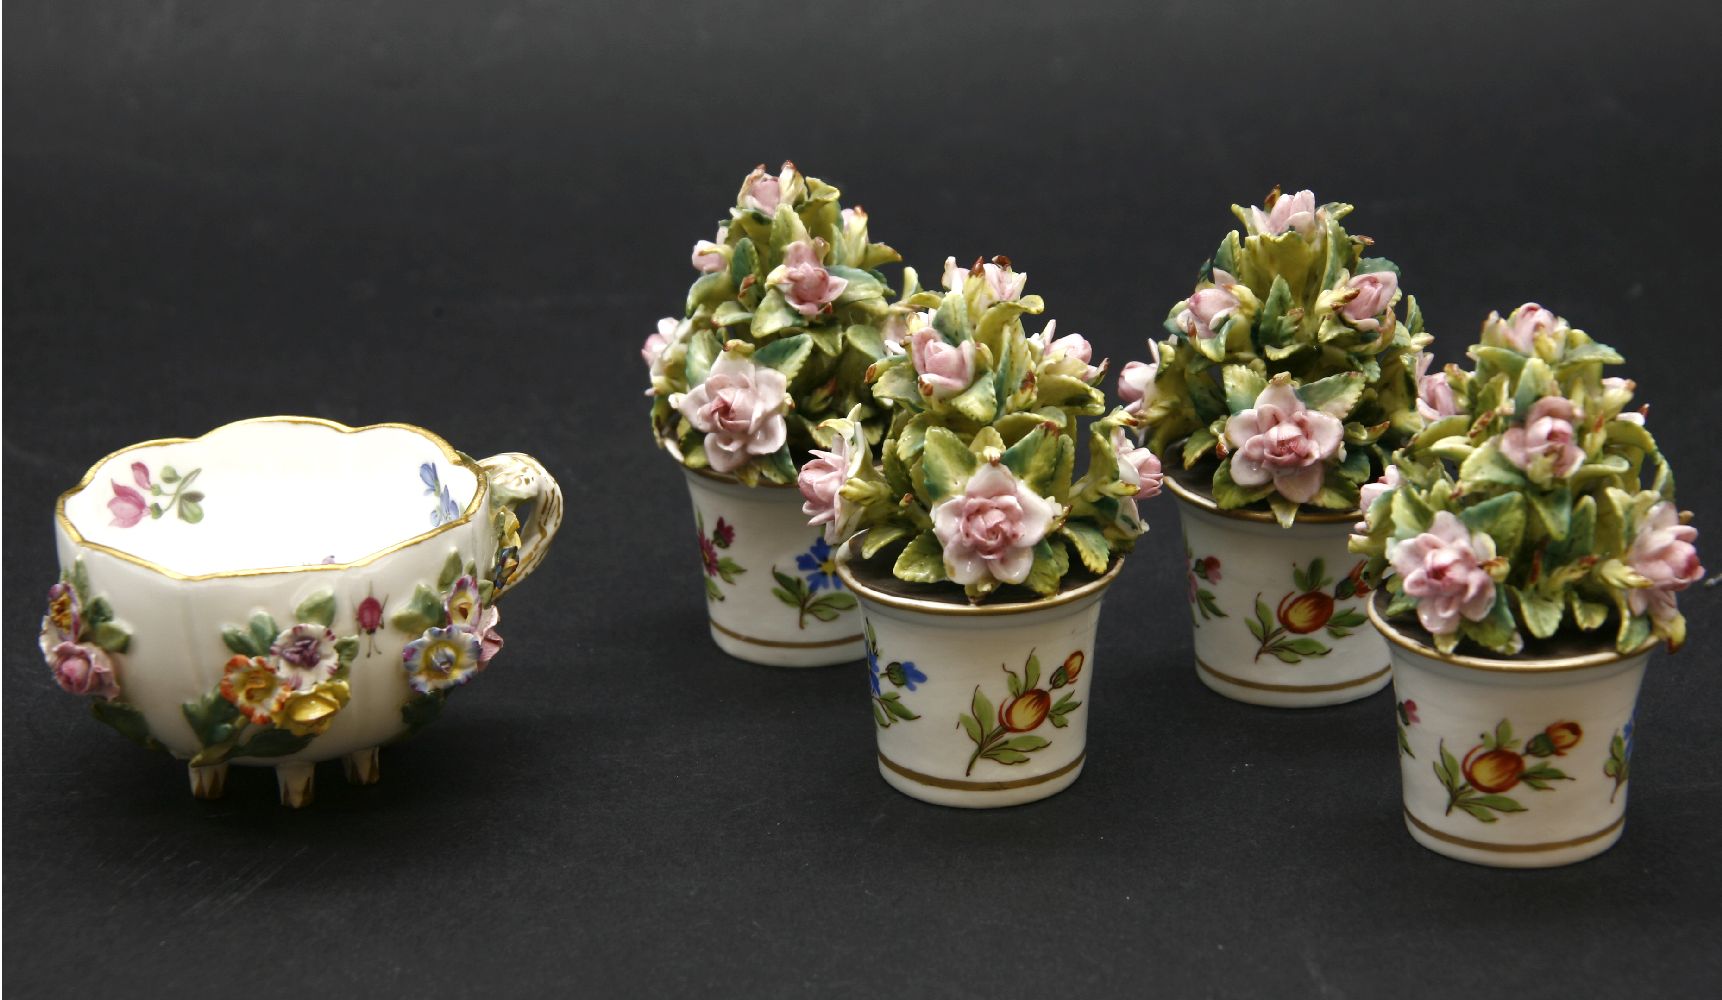 A Meissen cup, floral encrusted, and four Continental flowers in pots